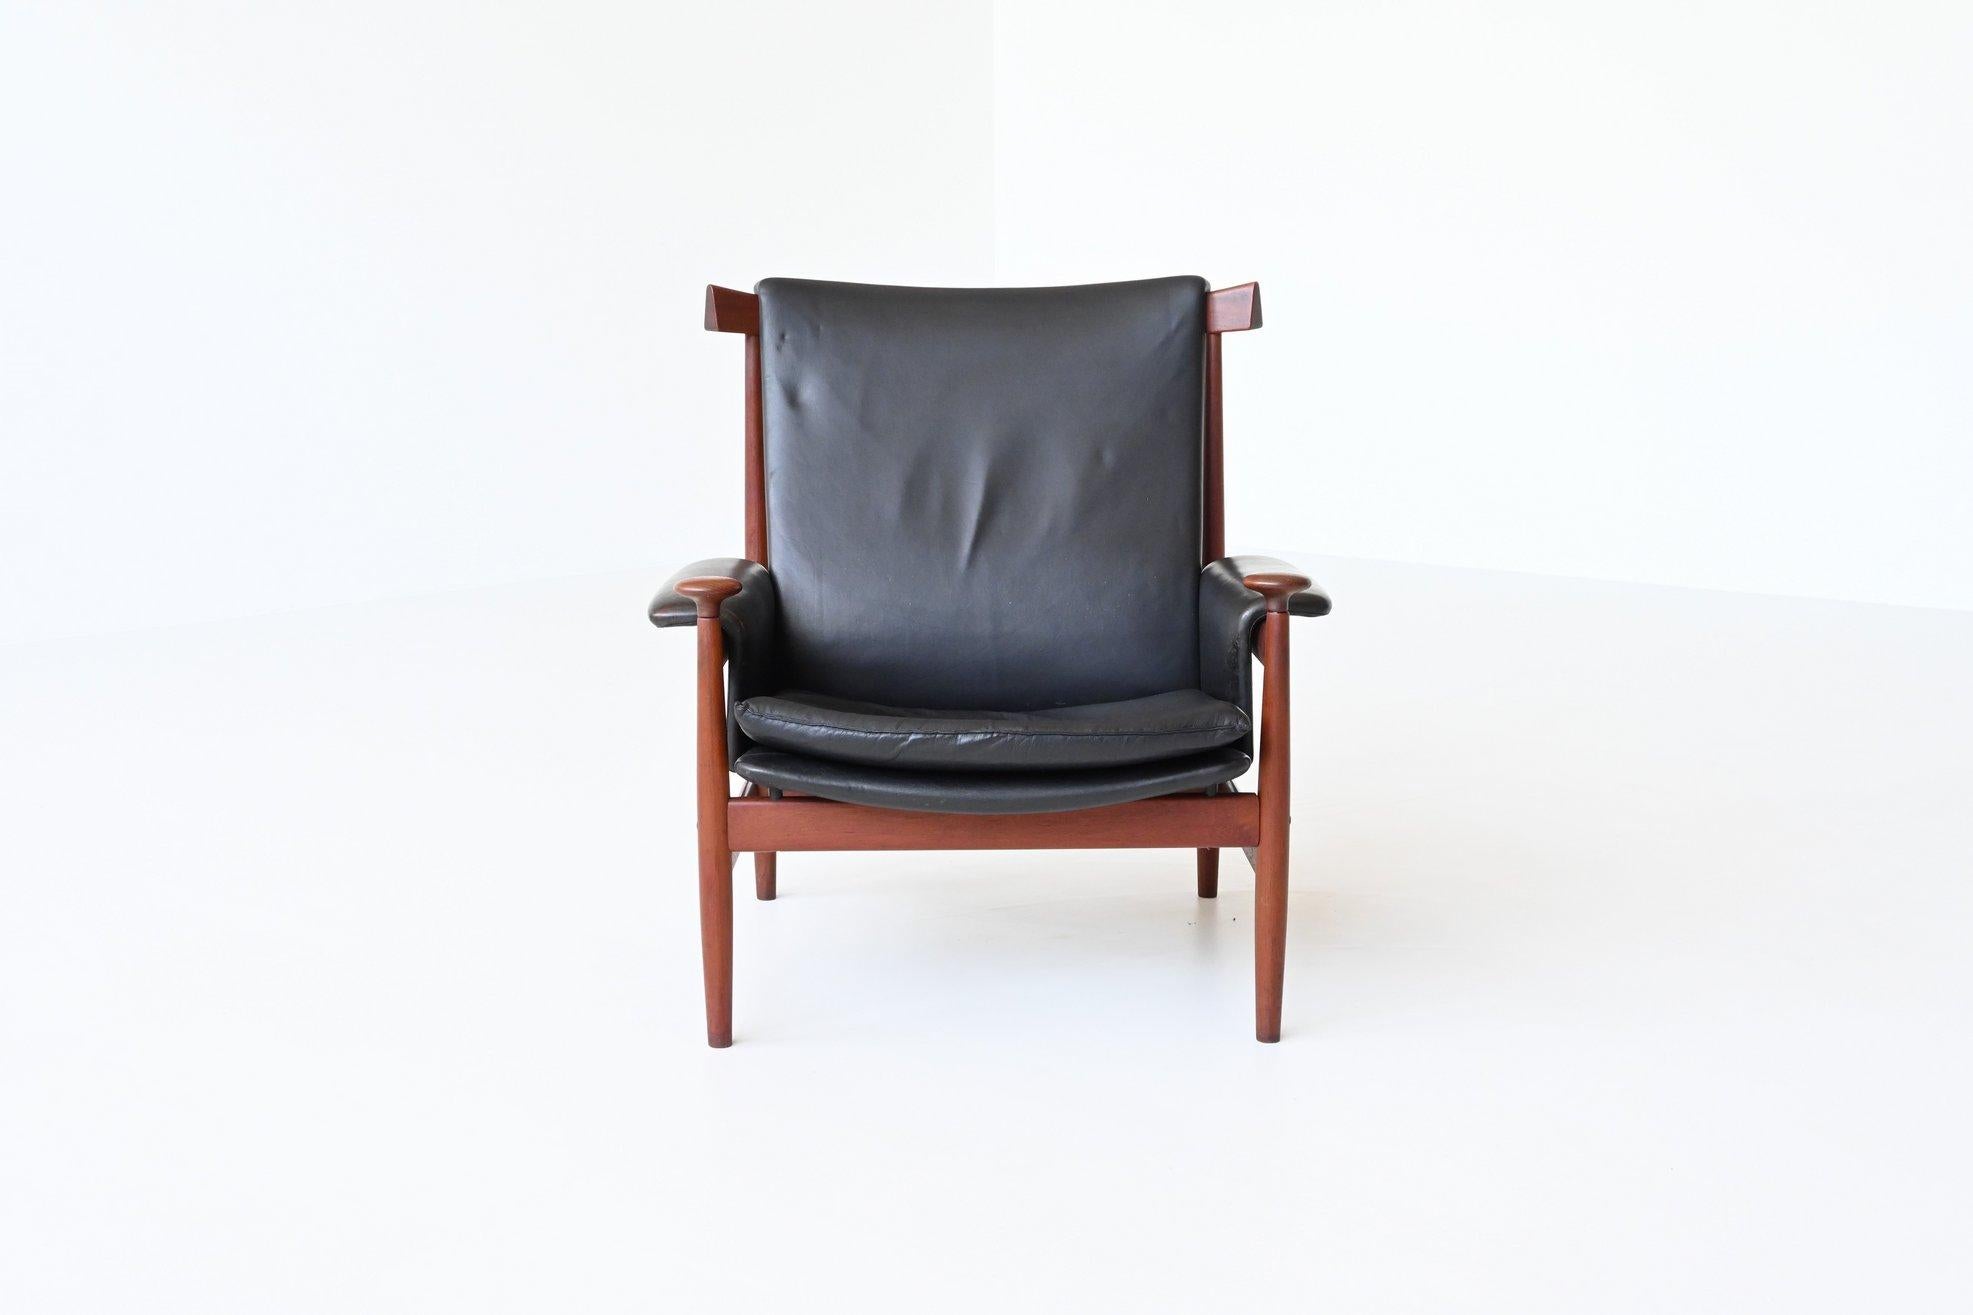 Stunning and very rare lounge chair “Bwana” model 152 designed by Finn Juhl for France & Son, Denmark 1962. It was originally intended as a kind of updated 